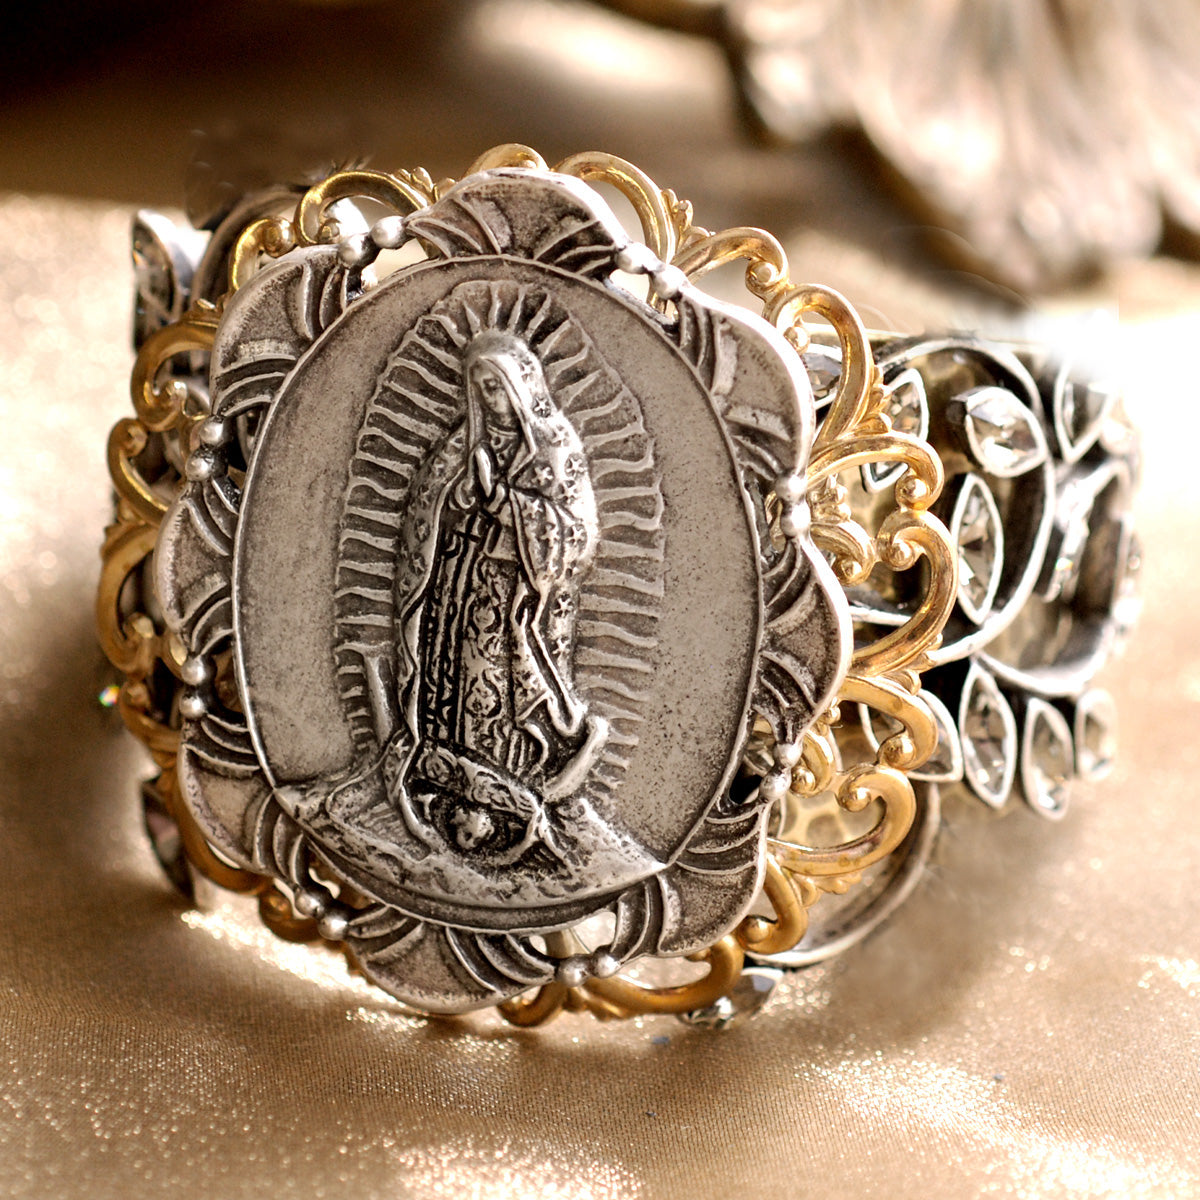 Our Lady of Guadalupe Cuff Bracelet BR900